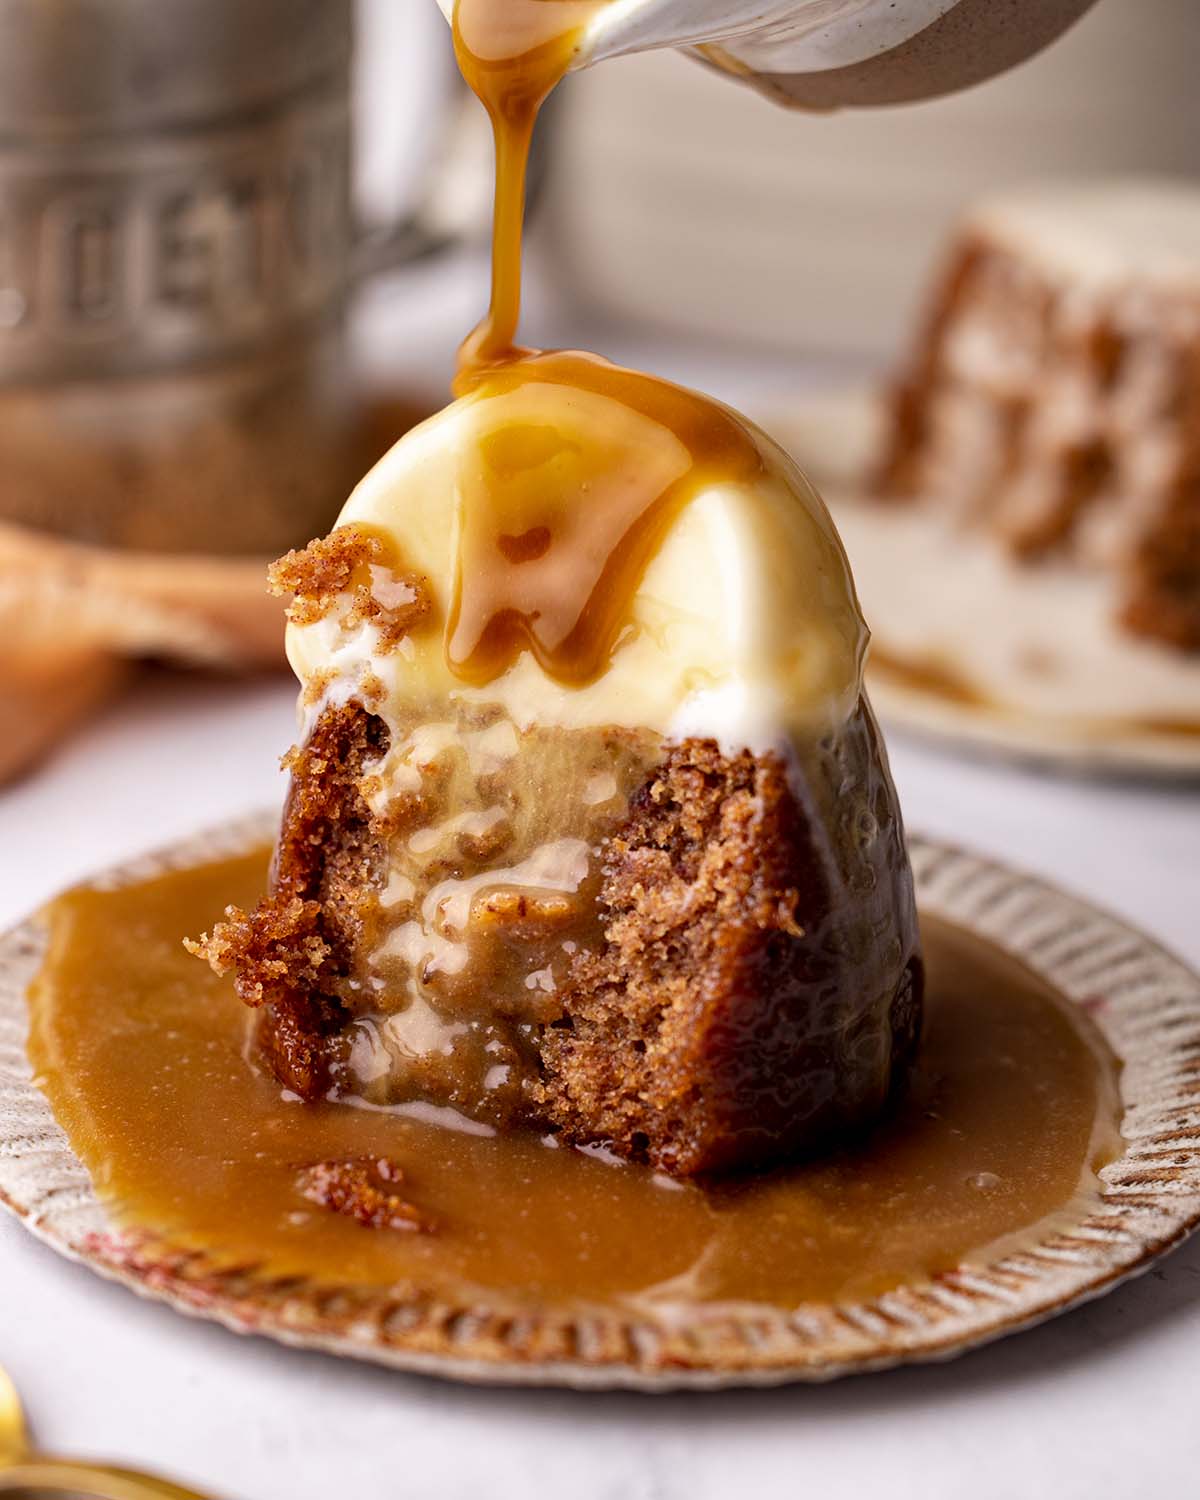 Sticky date pudding with scoop of ice cream with toffee sauce poured on top.